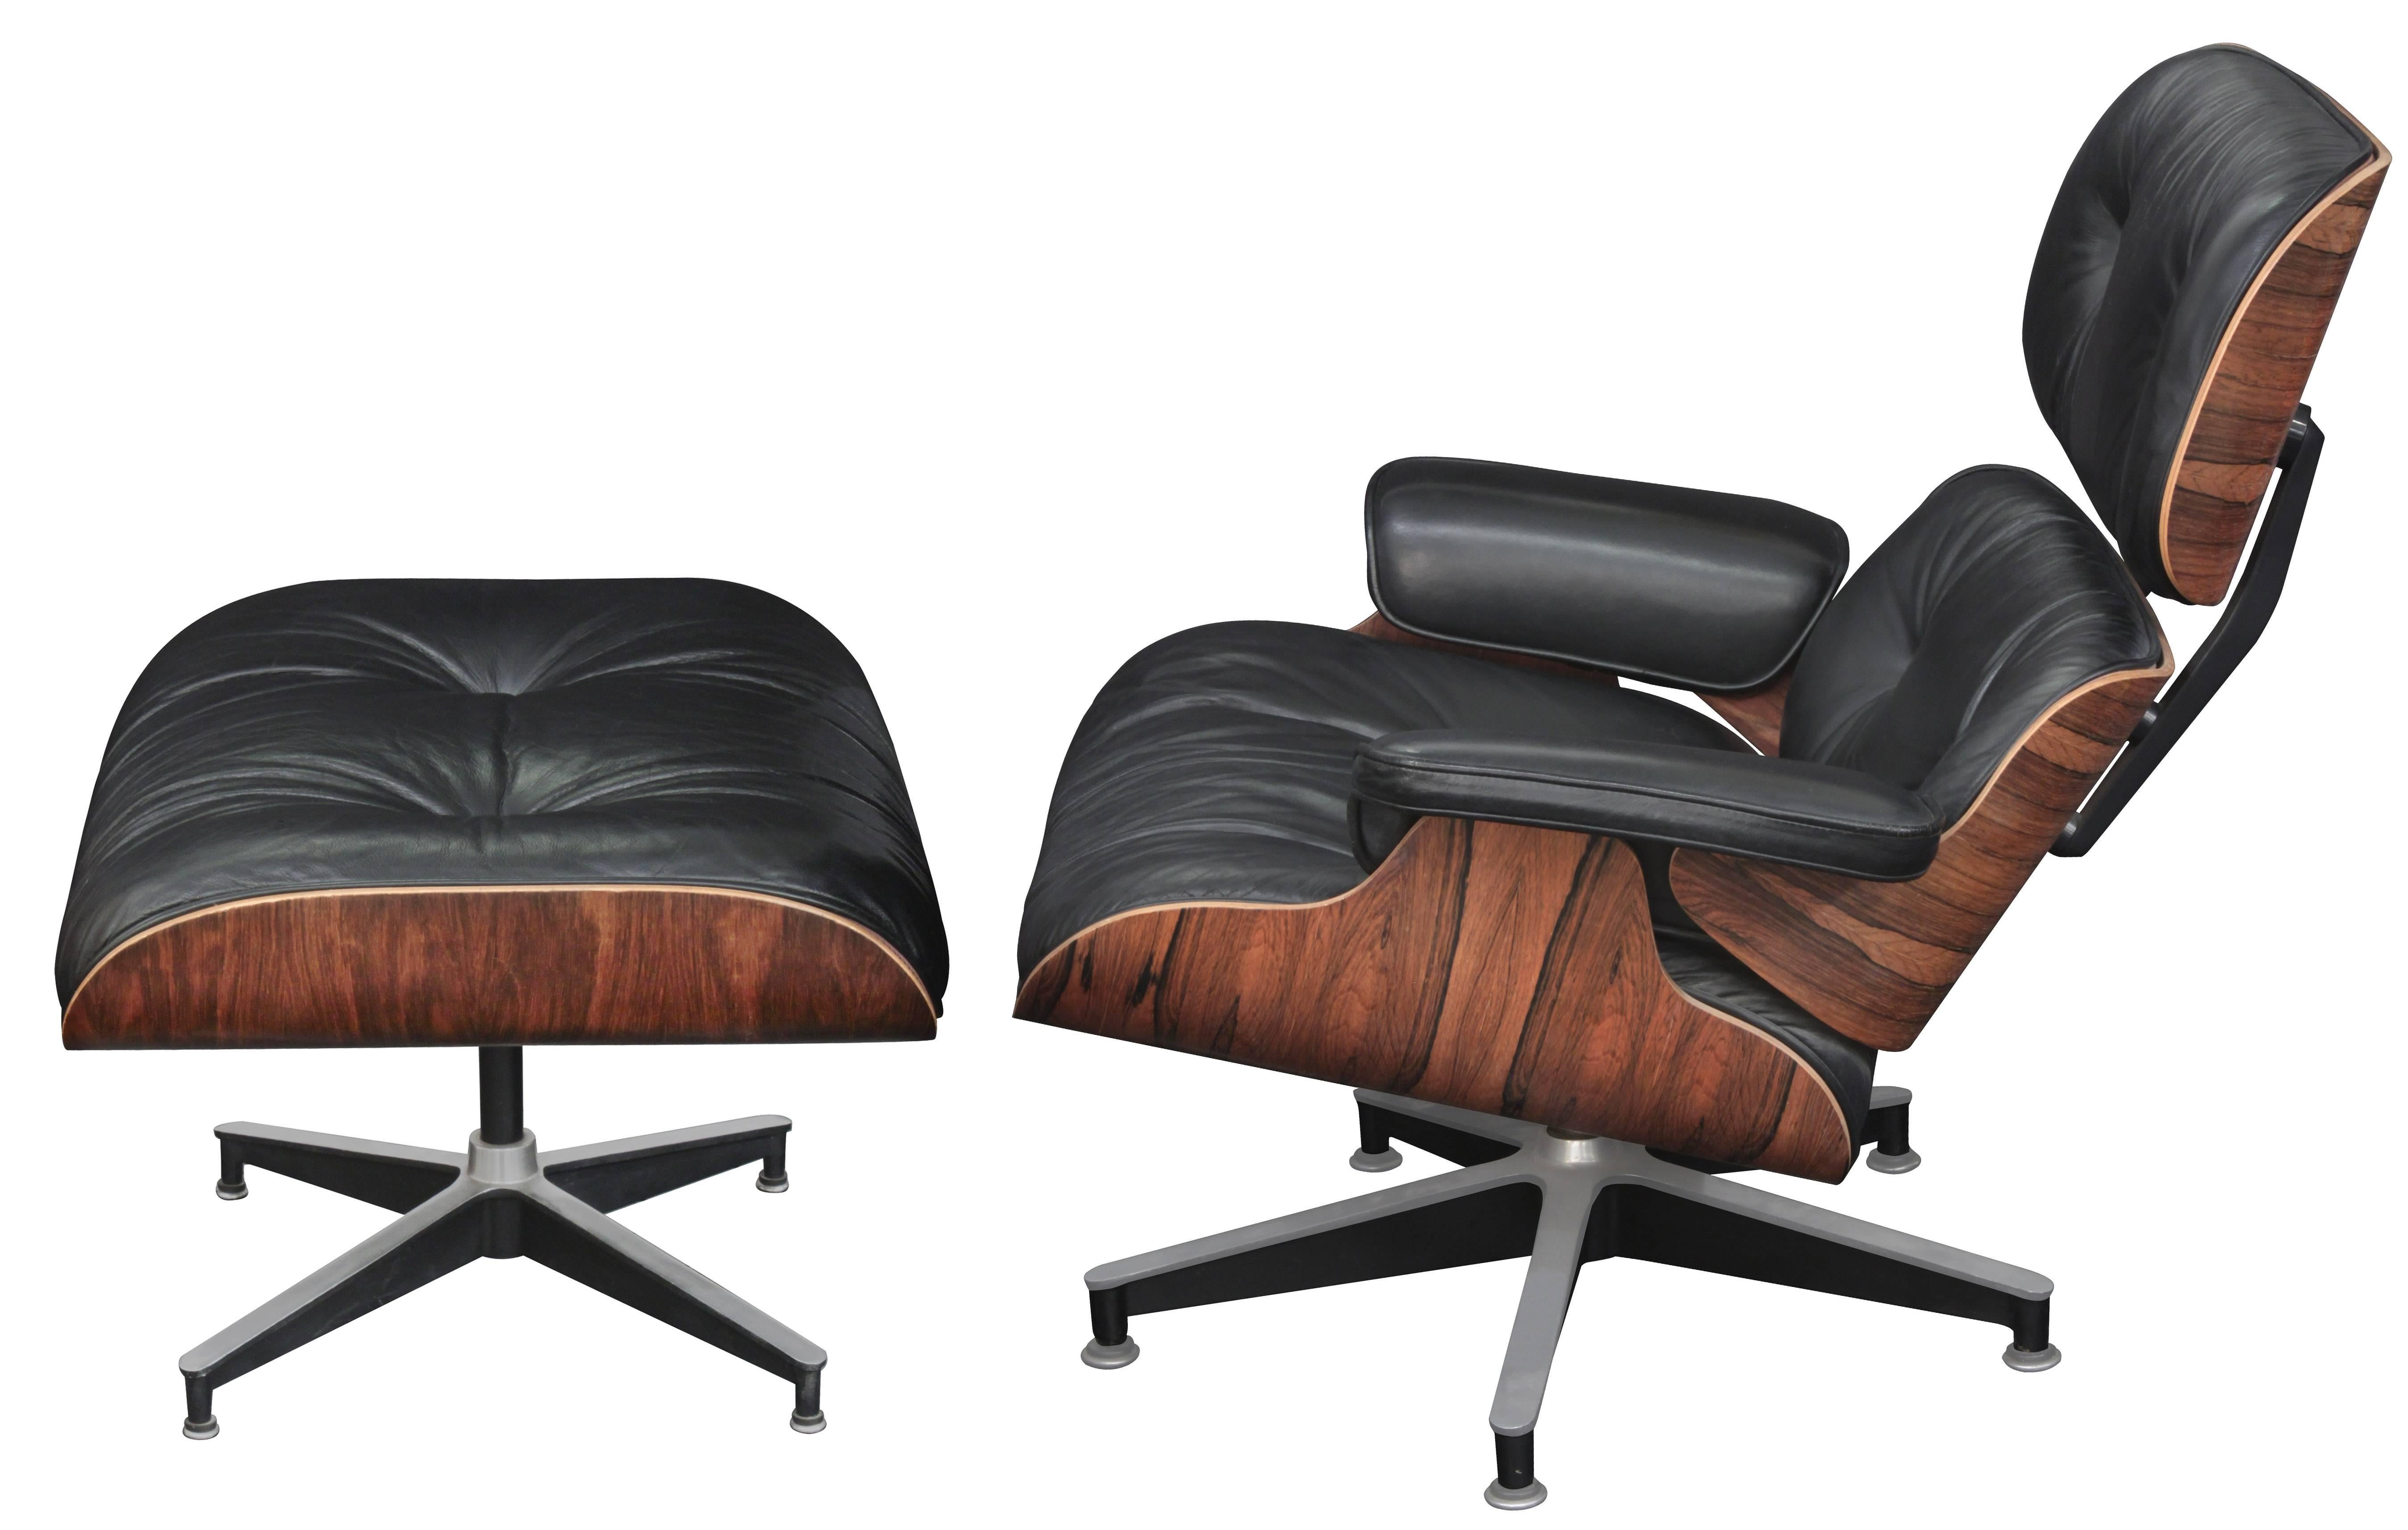 Iconic lounge chair and ottoman model numbers 670 and 671 in rosewood with black leather by Charles and Ray Eames for Herman Miller, American 1981. Ottoman is 25 1/2 inches wide x 20 1/2 inches deep x 16 inches high.